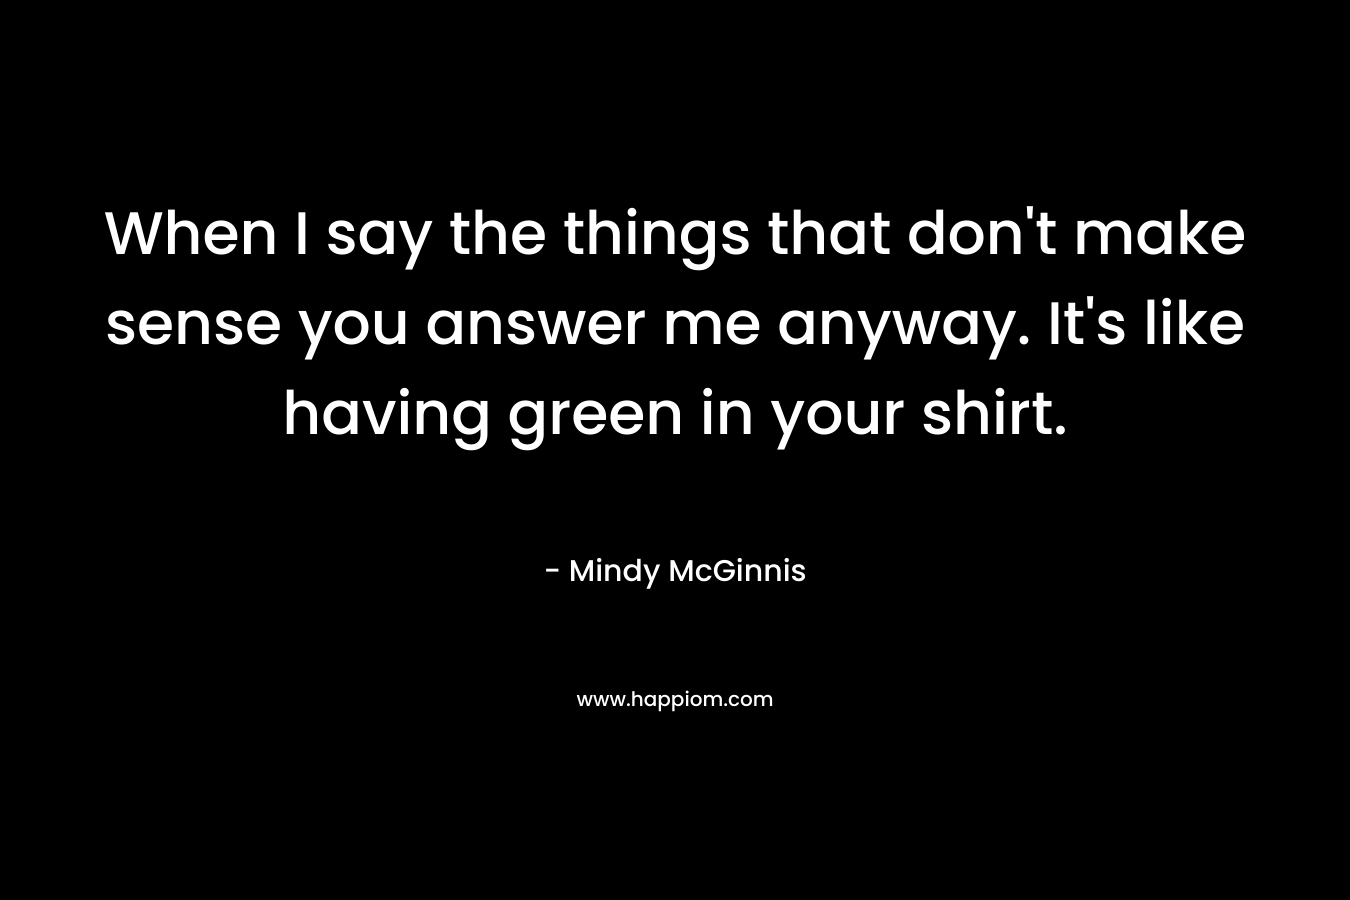 When I say the things that don’t make sense you answer me anyway. It’s like having green in your shirt. – Mindy McGinnis